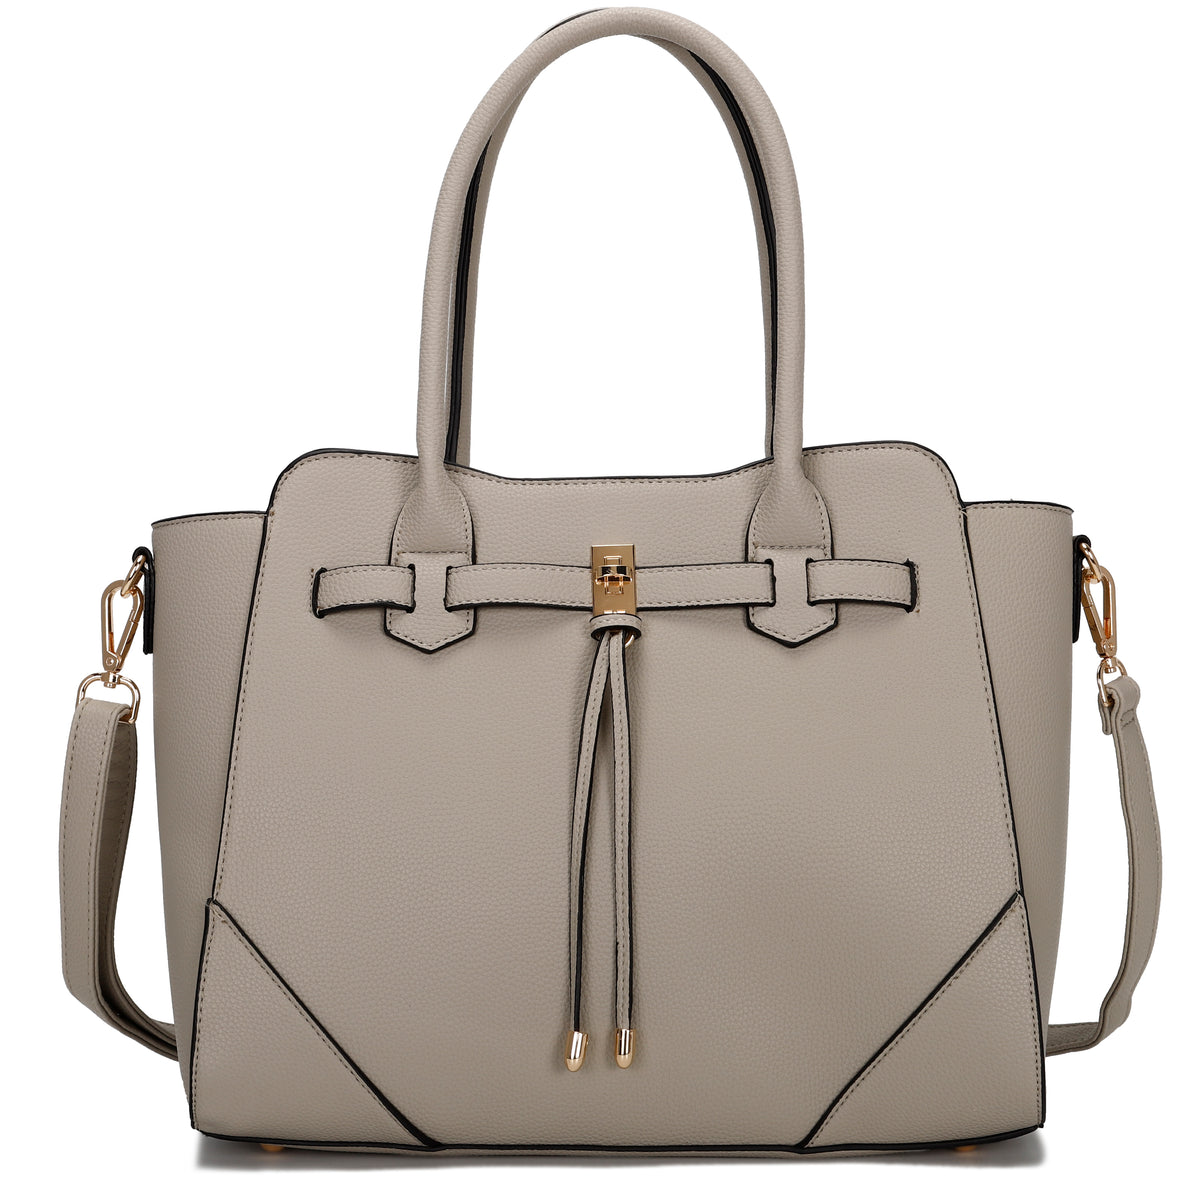 CALYX Cindy Large Tote